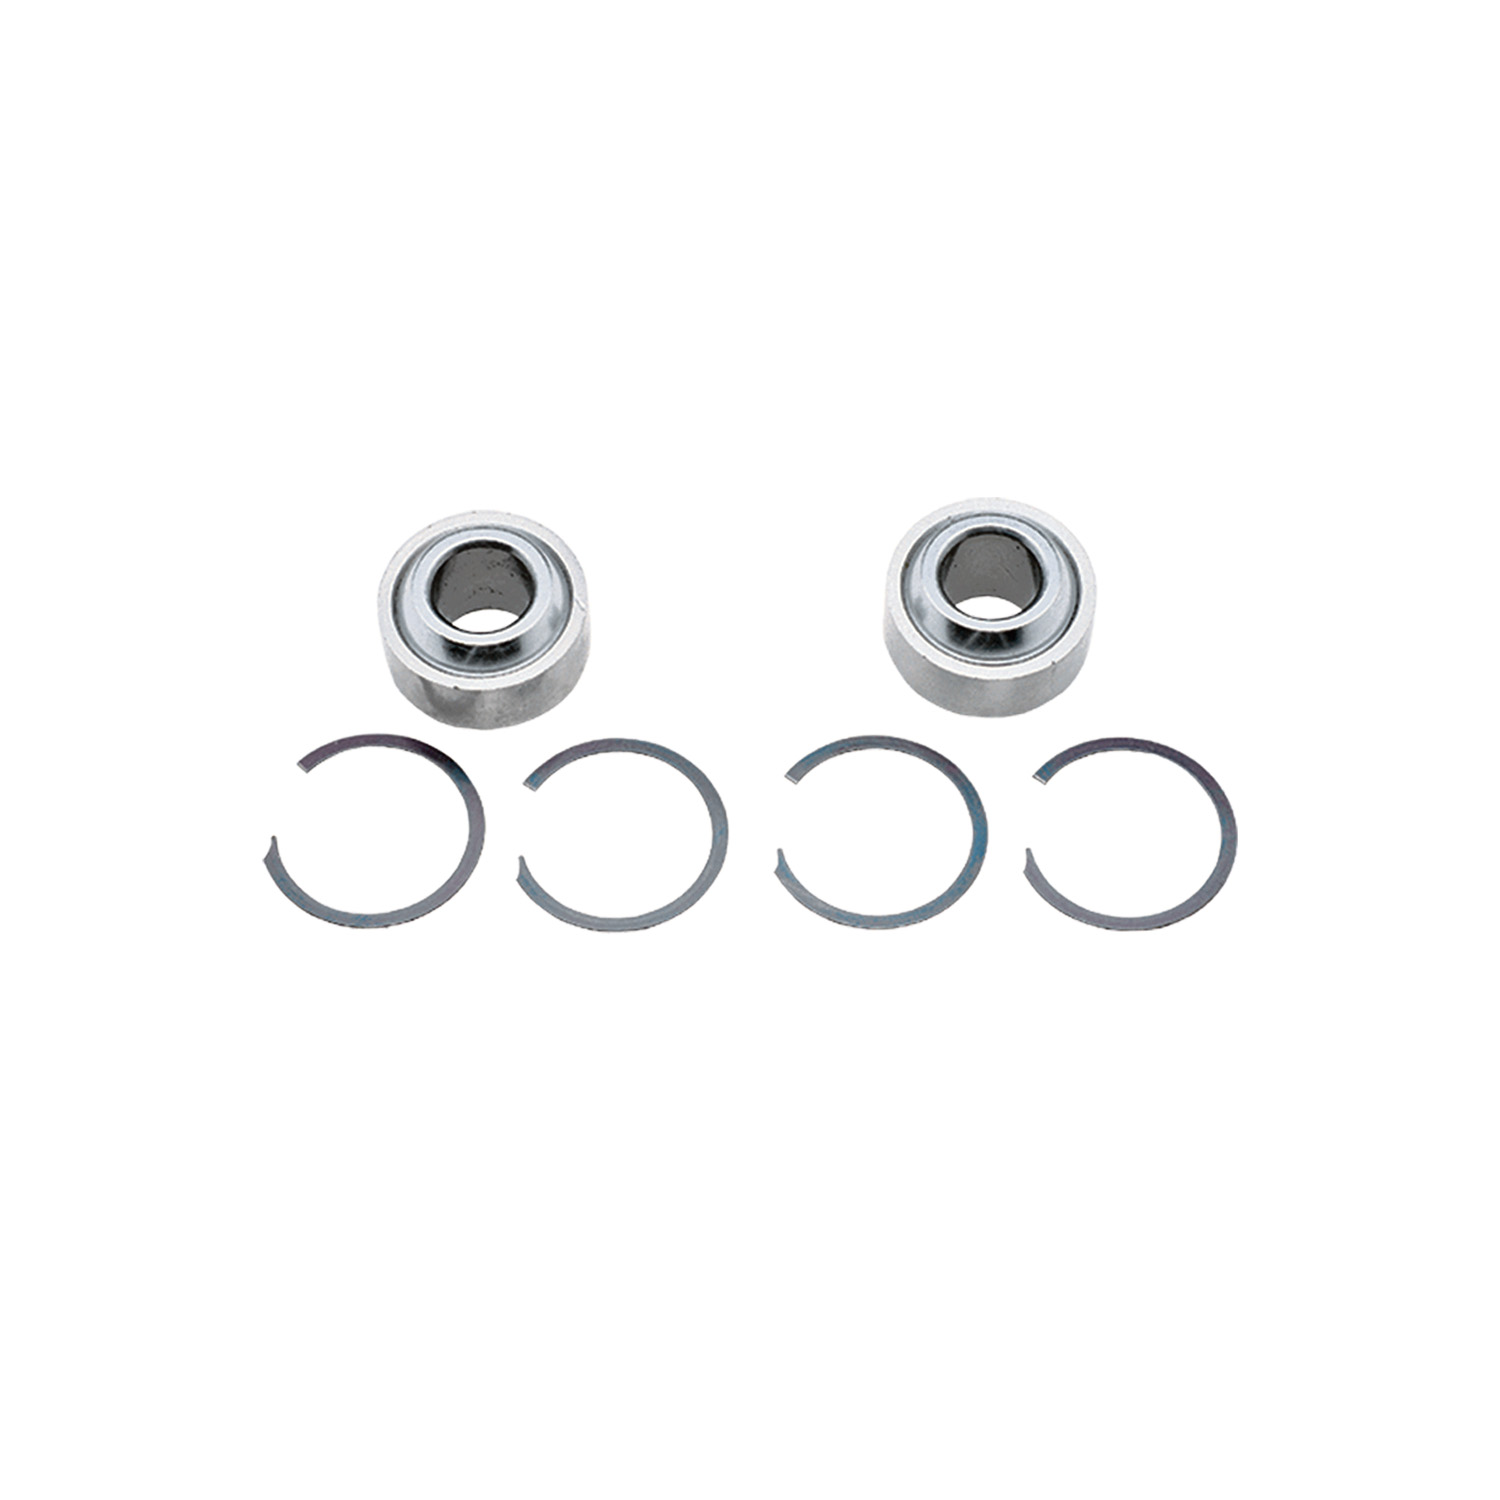 QA1 Replacement Bearings Kit includes two bearings with snap rings. - SIB8-101PK